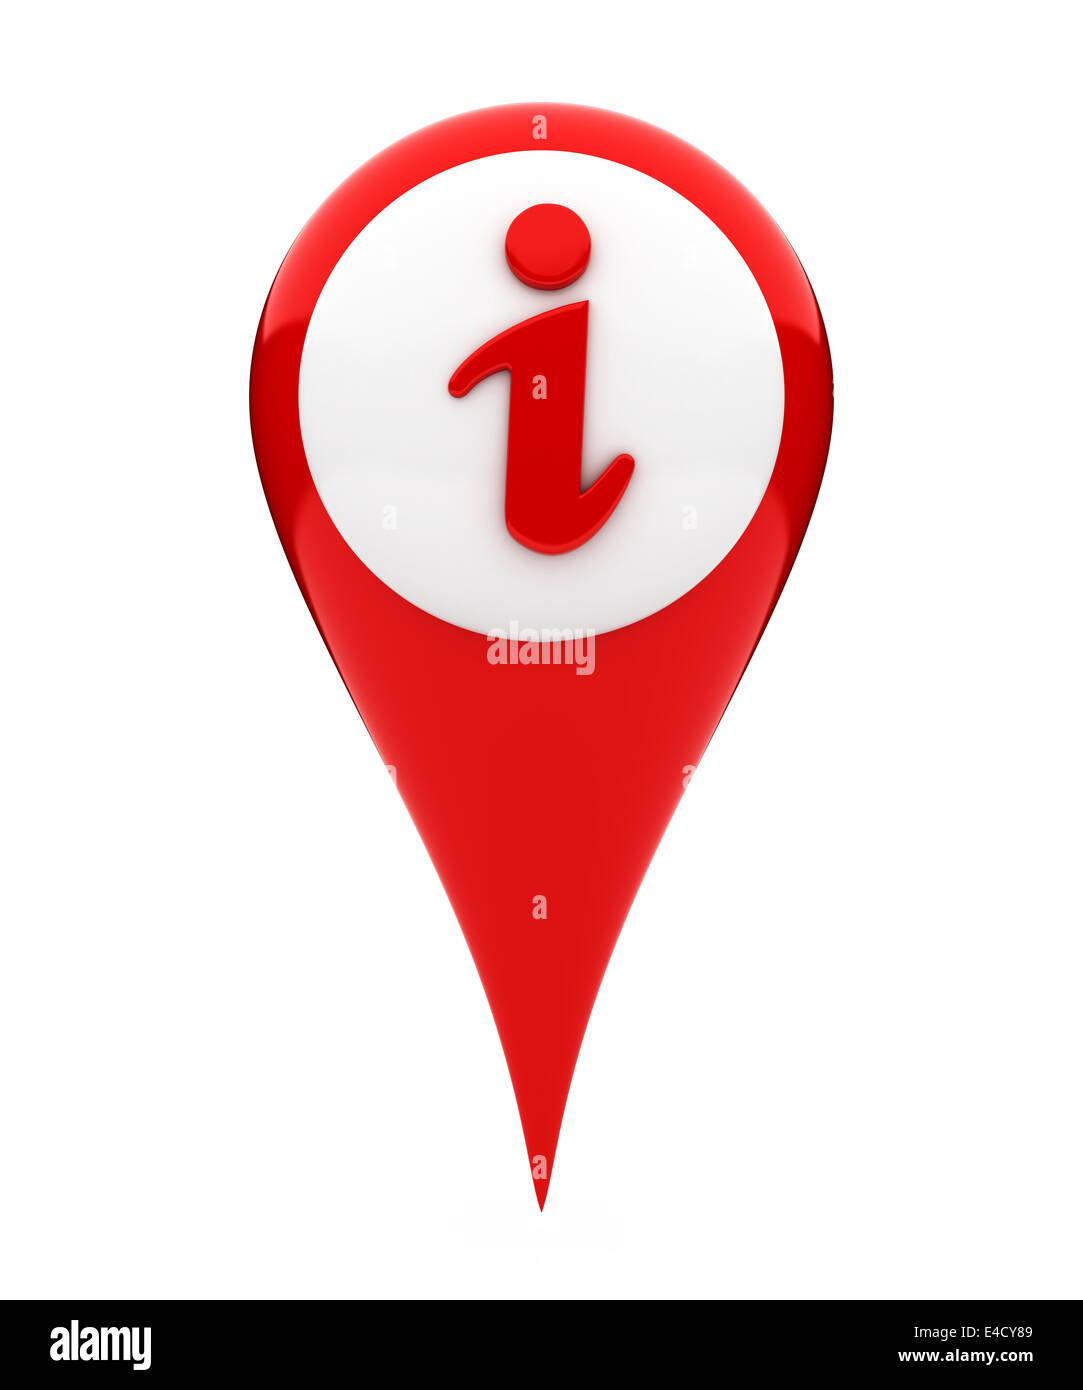 Location marker showing information icon Stock Photo